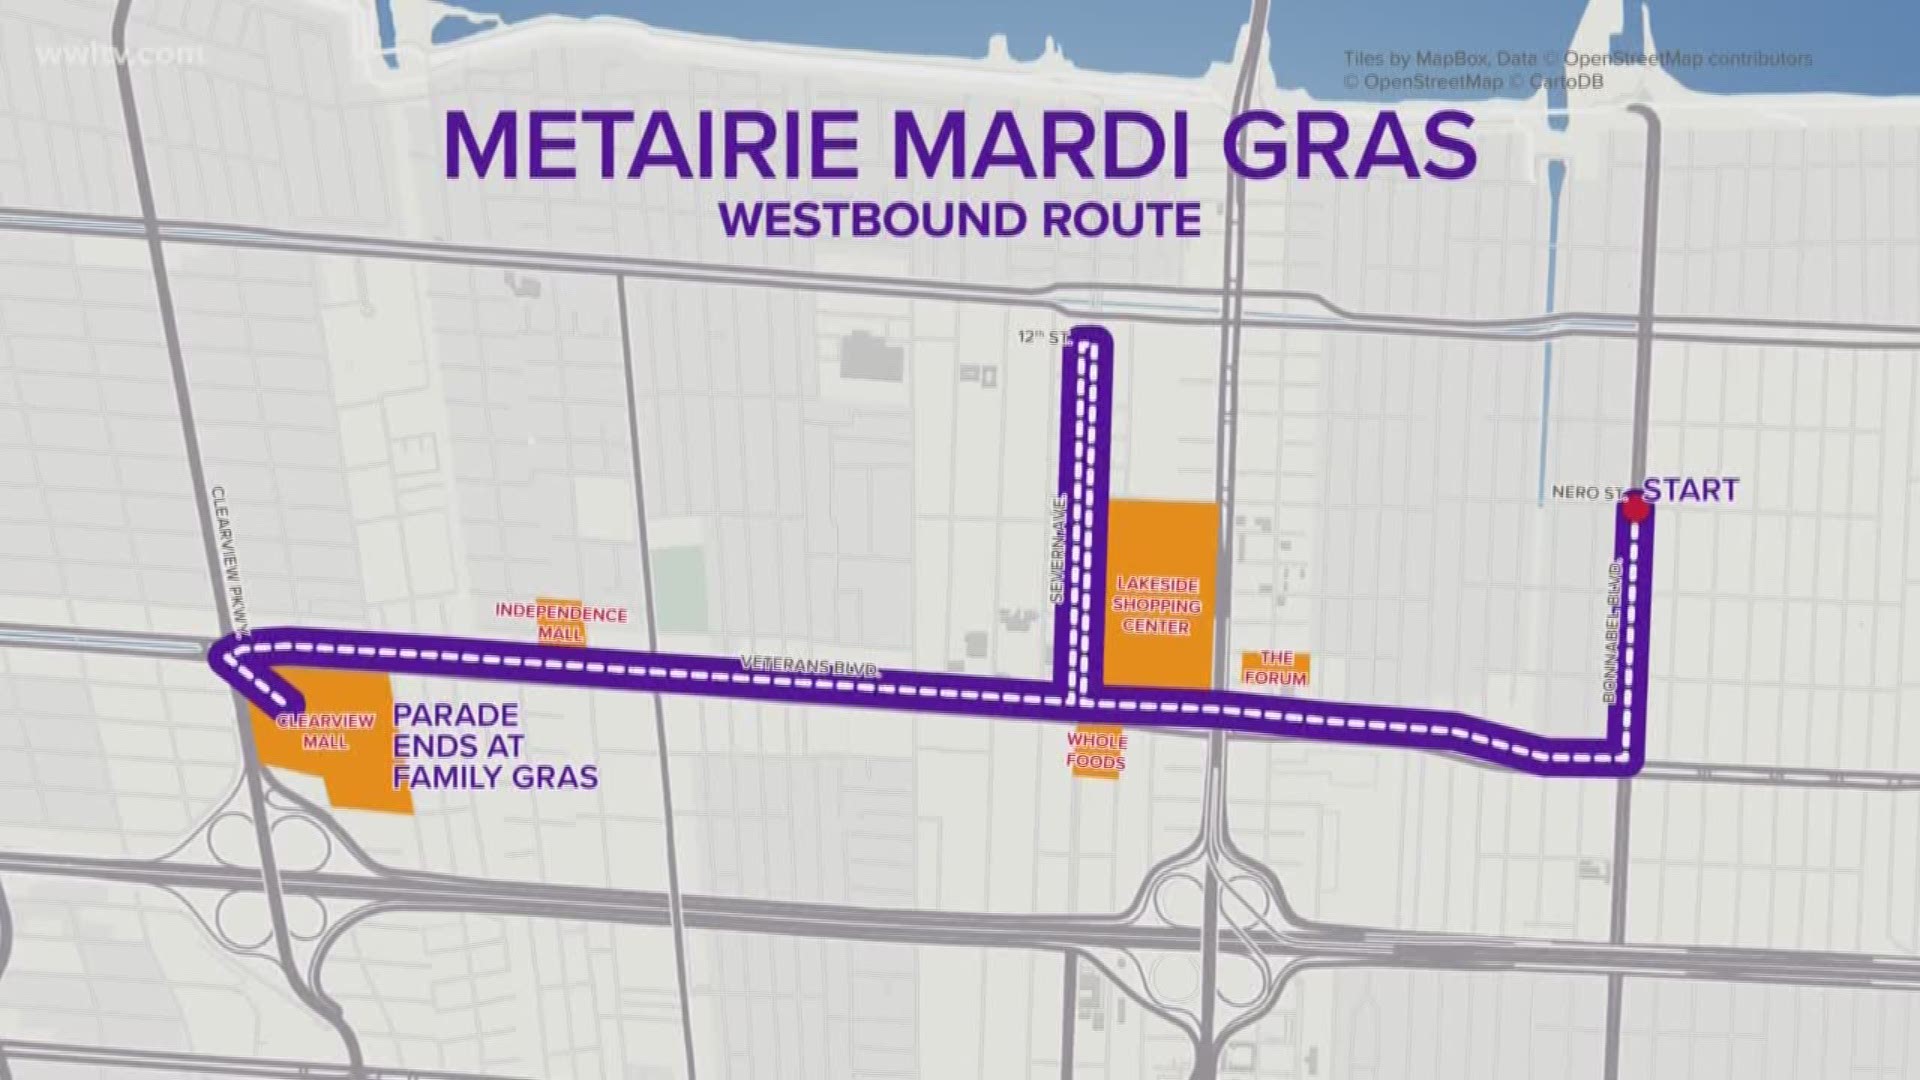 A change to some parade routes and to Family Gras.